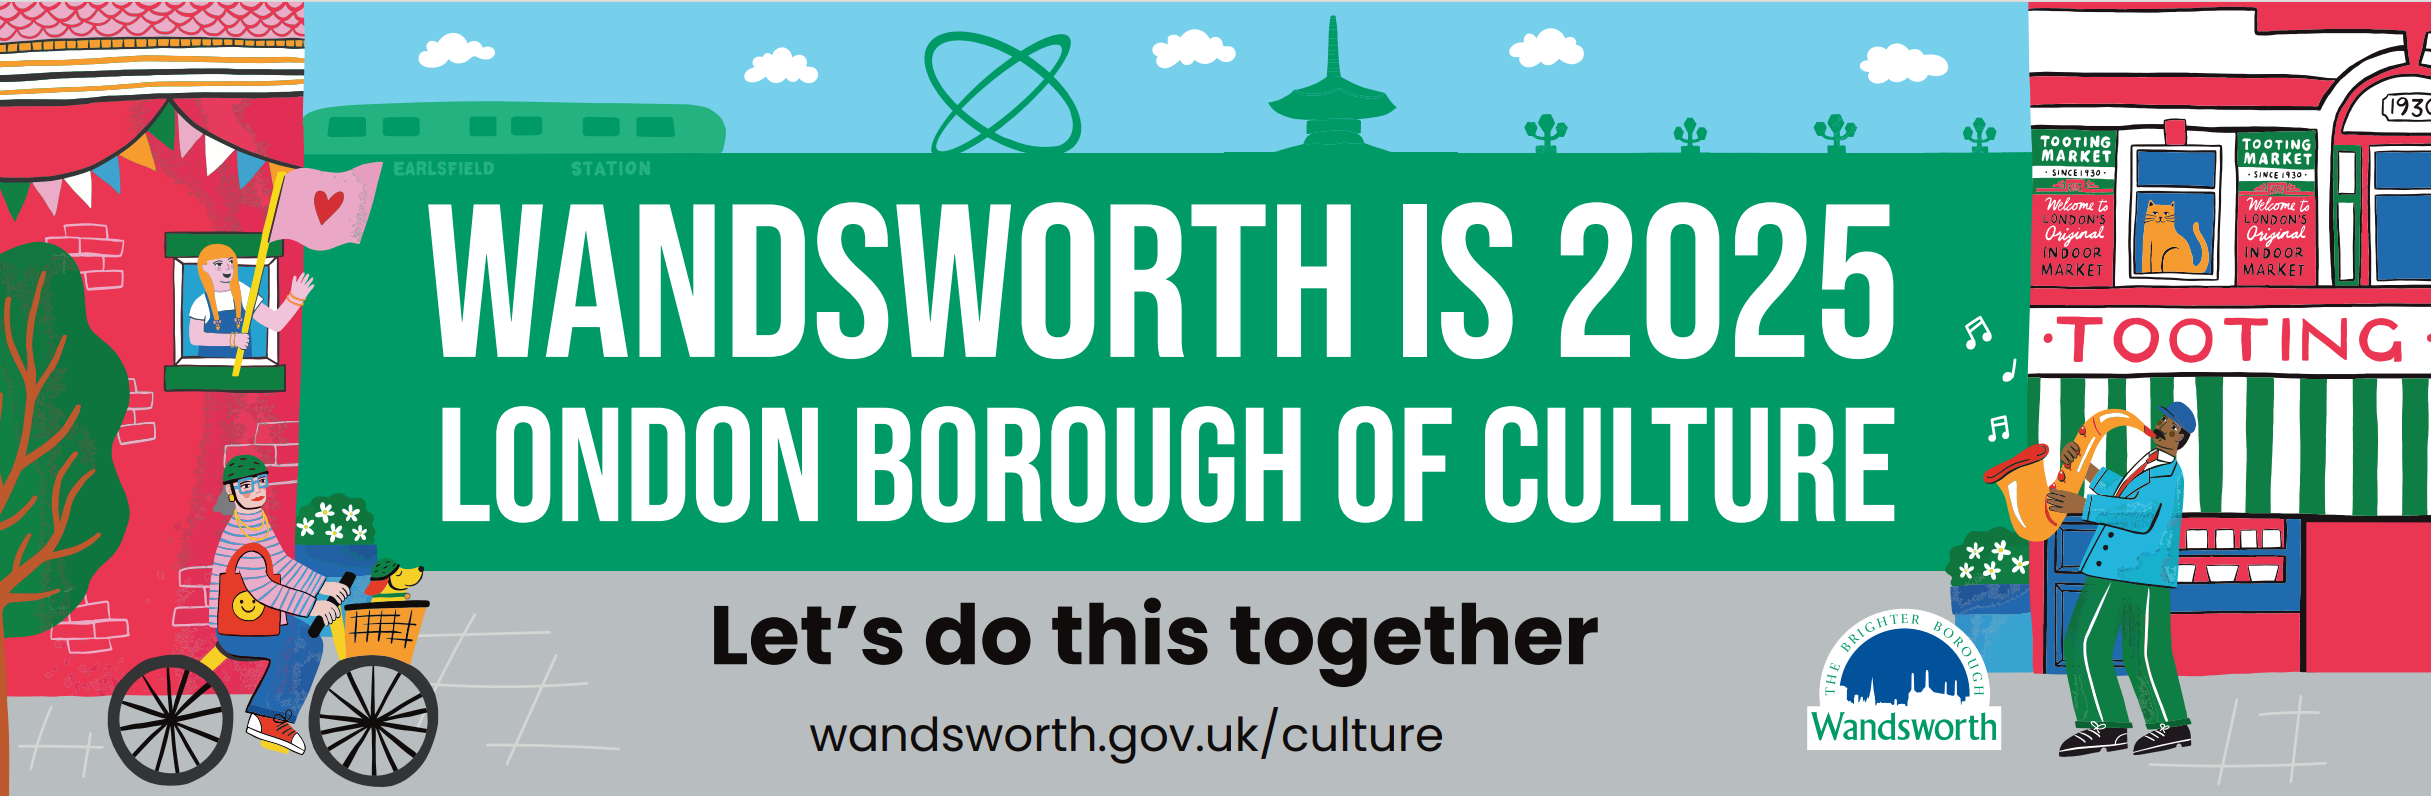 Wandsworth is London Borough of Culture 2025